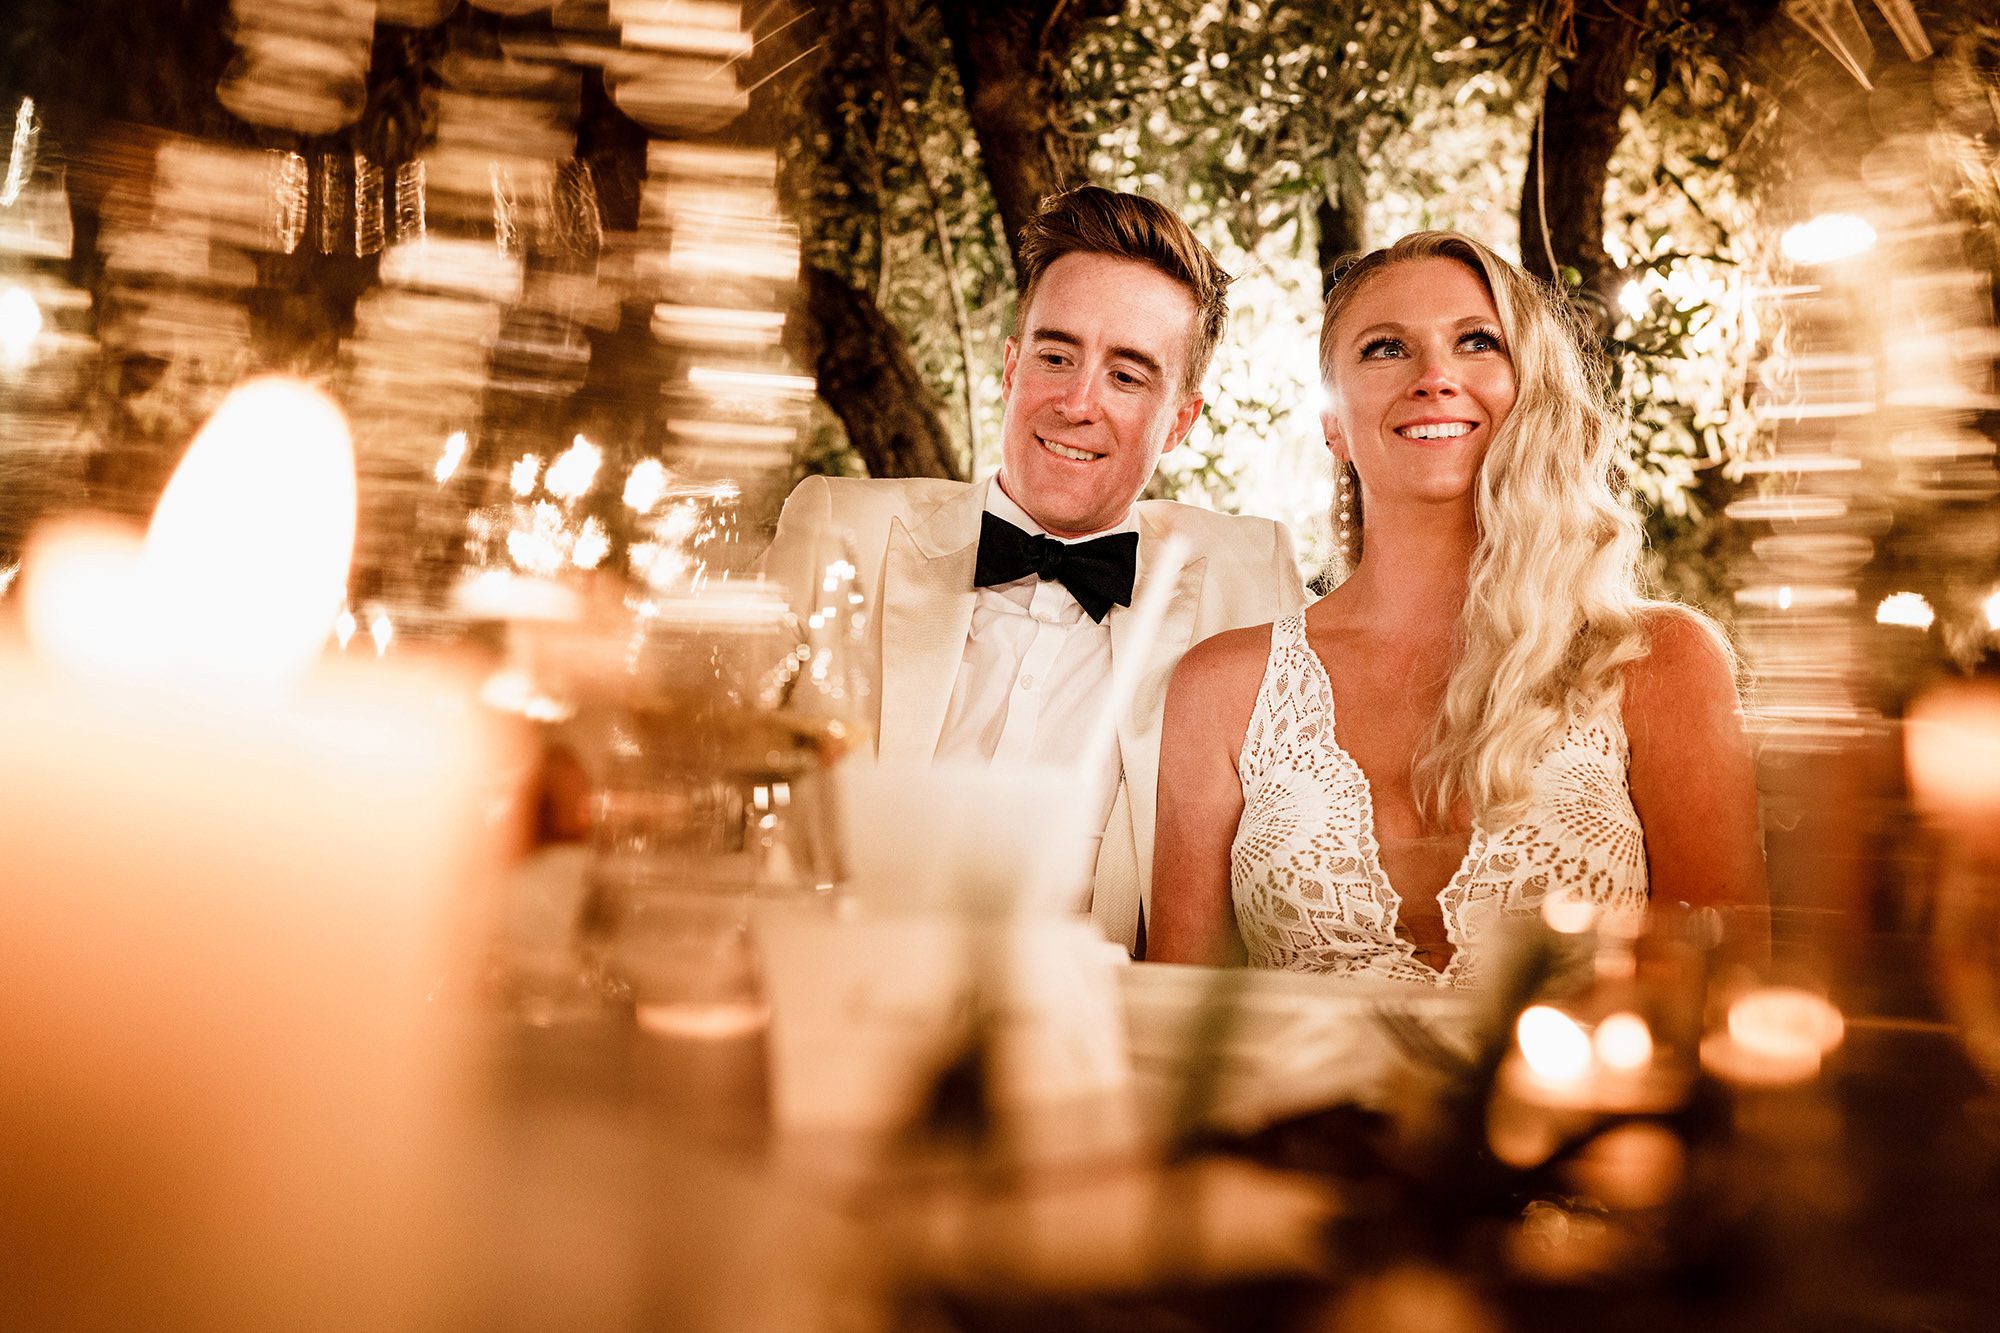 A bride and groom smiling as they listen to wedding speeches. Creative wedding photography by Stephen Walker